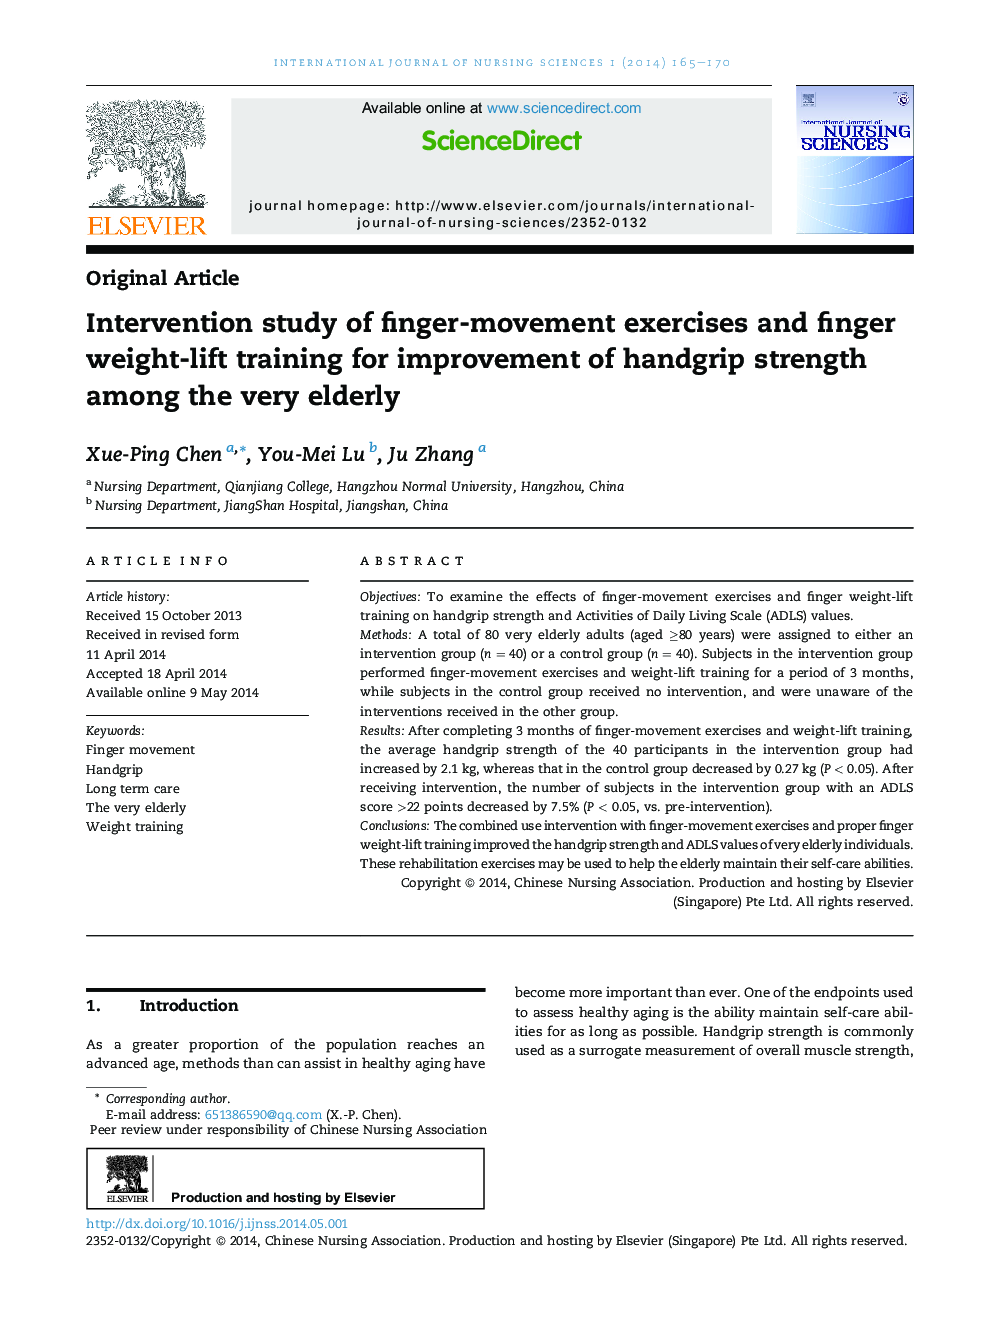 Intervention study of finger-movement exercises and finger weight-lift training for improvement of handgrip strength among the very elderly 